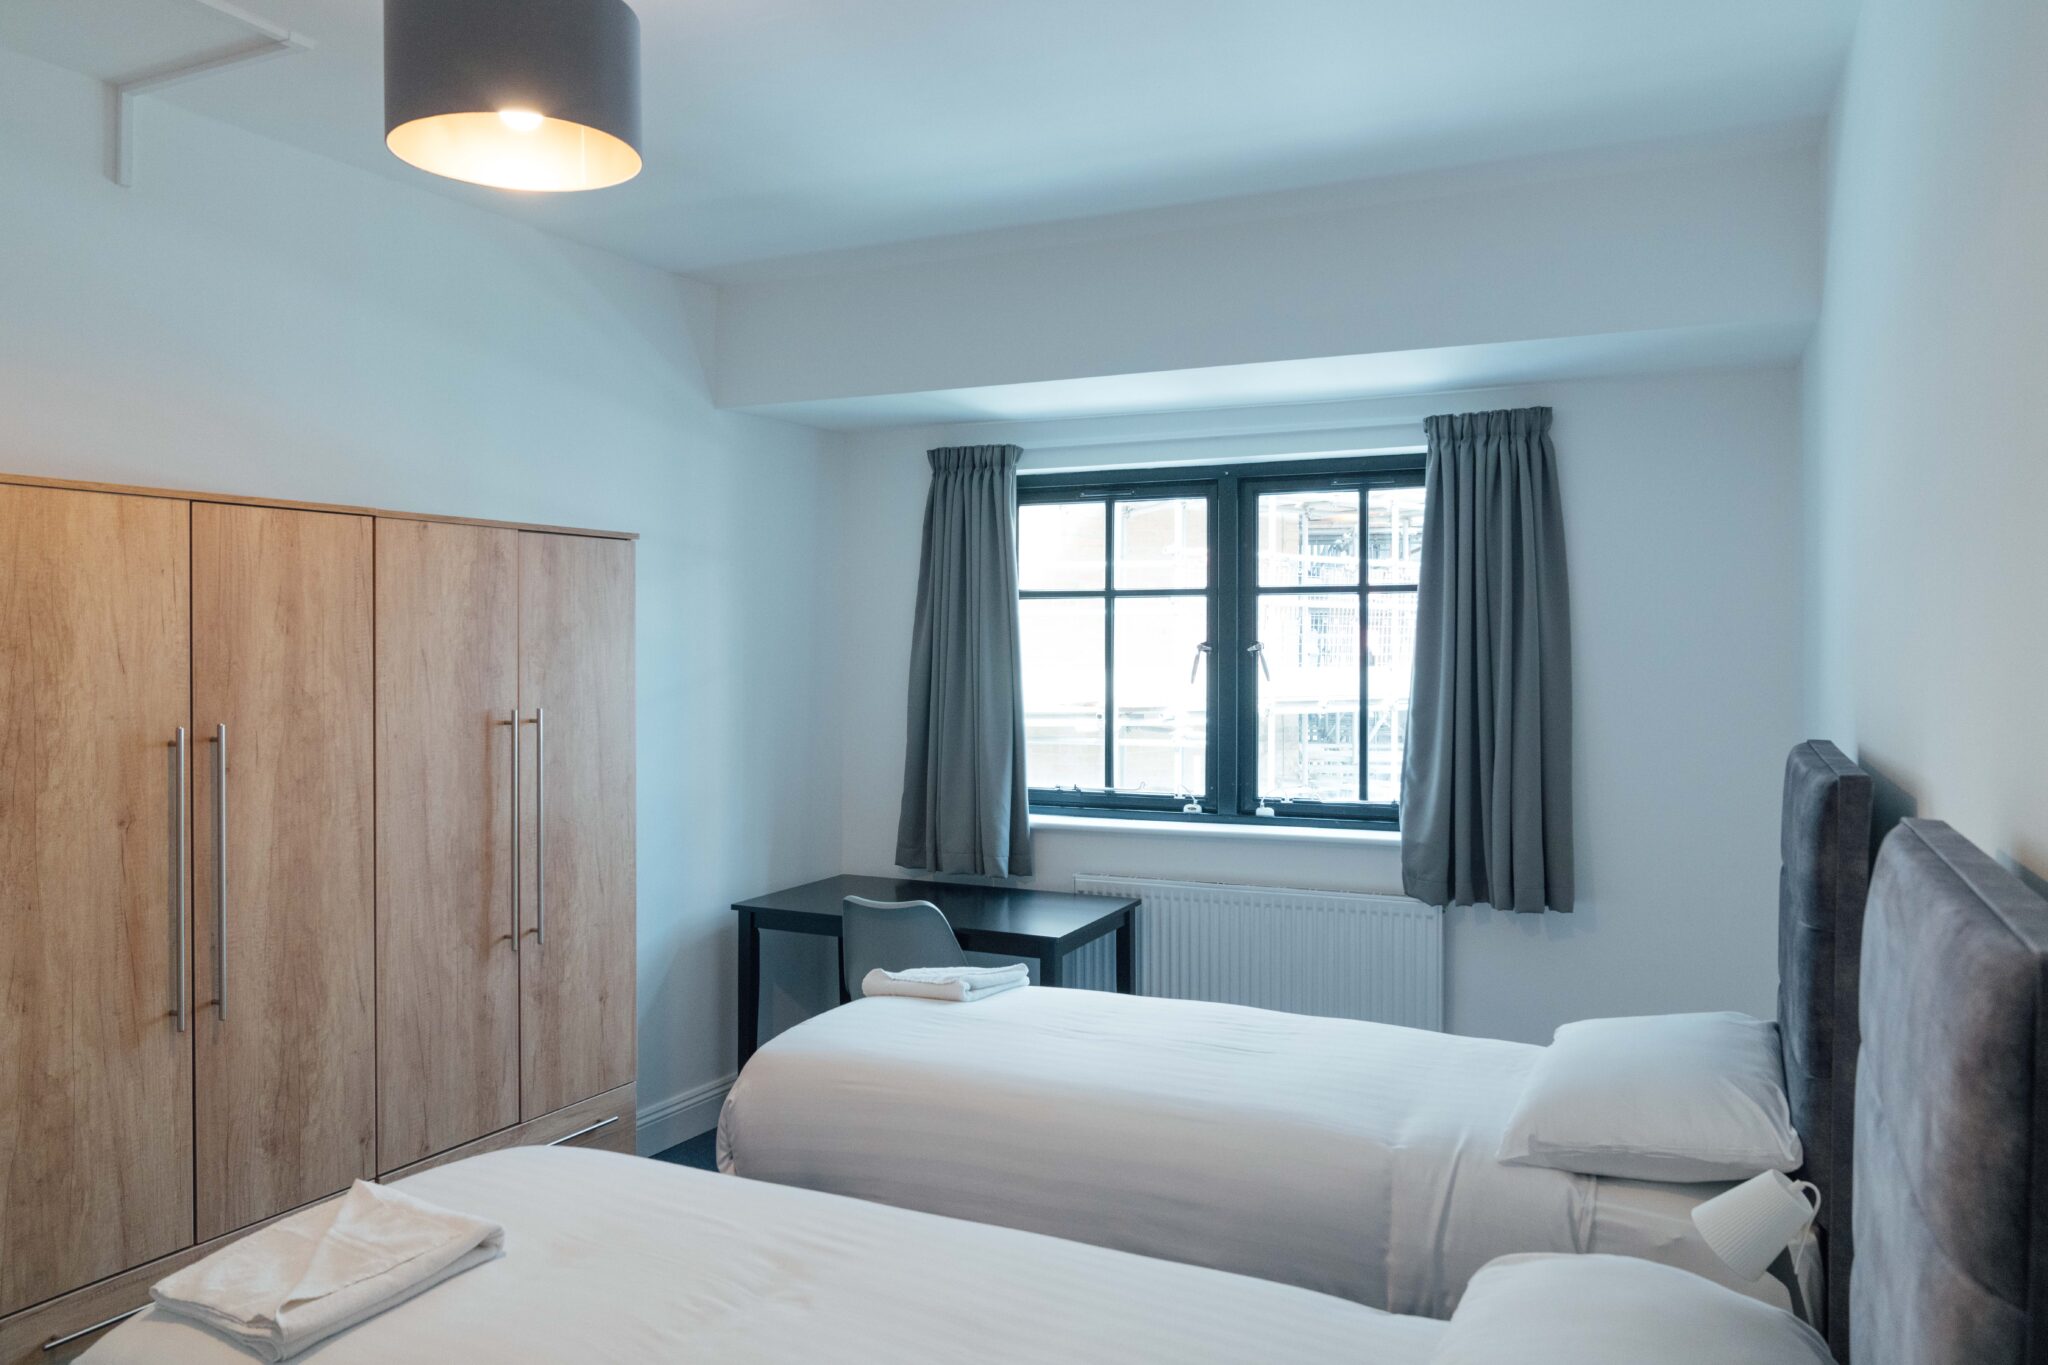 Student housing bedroom in central london